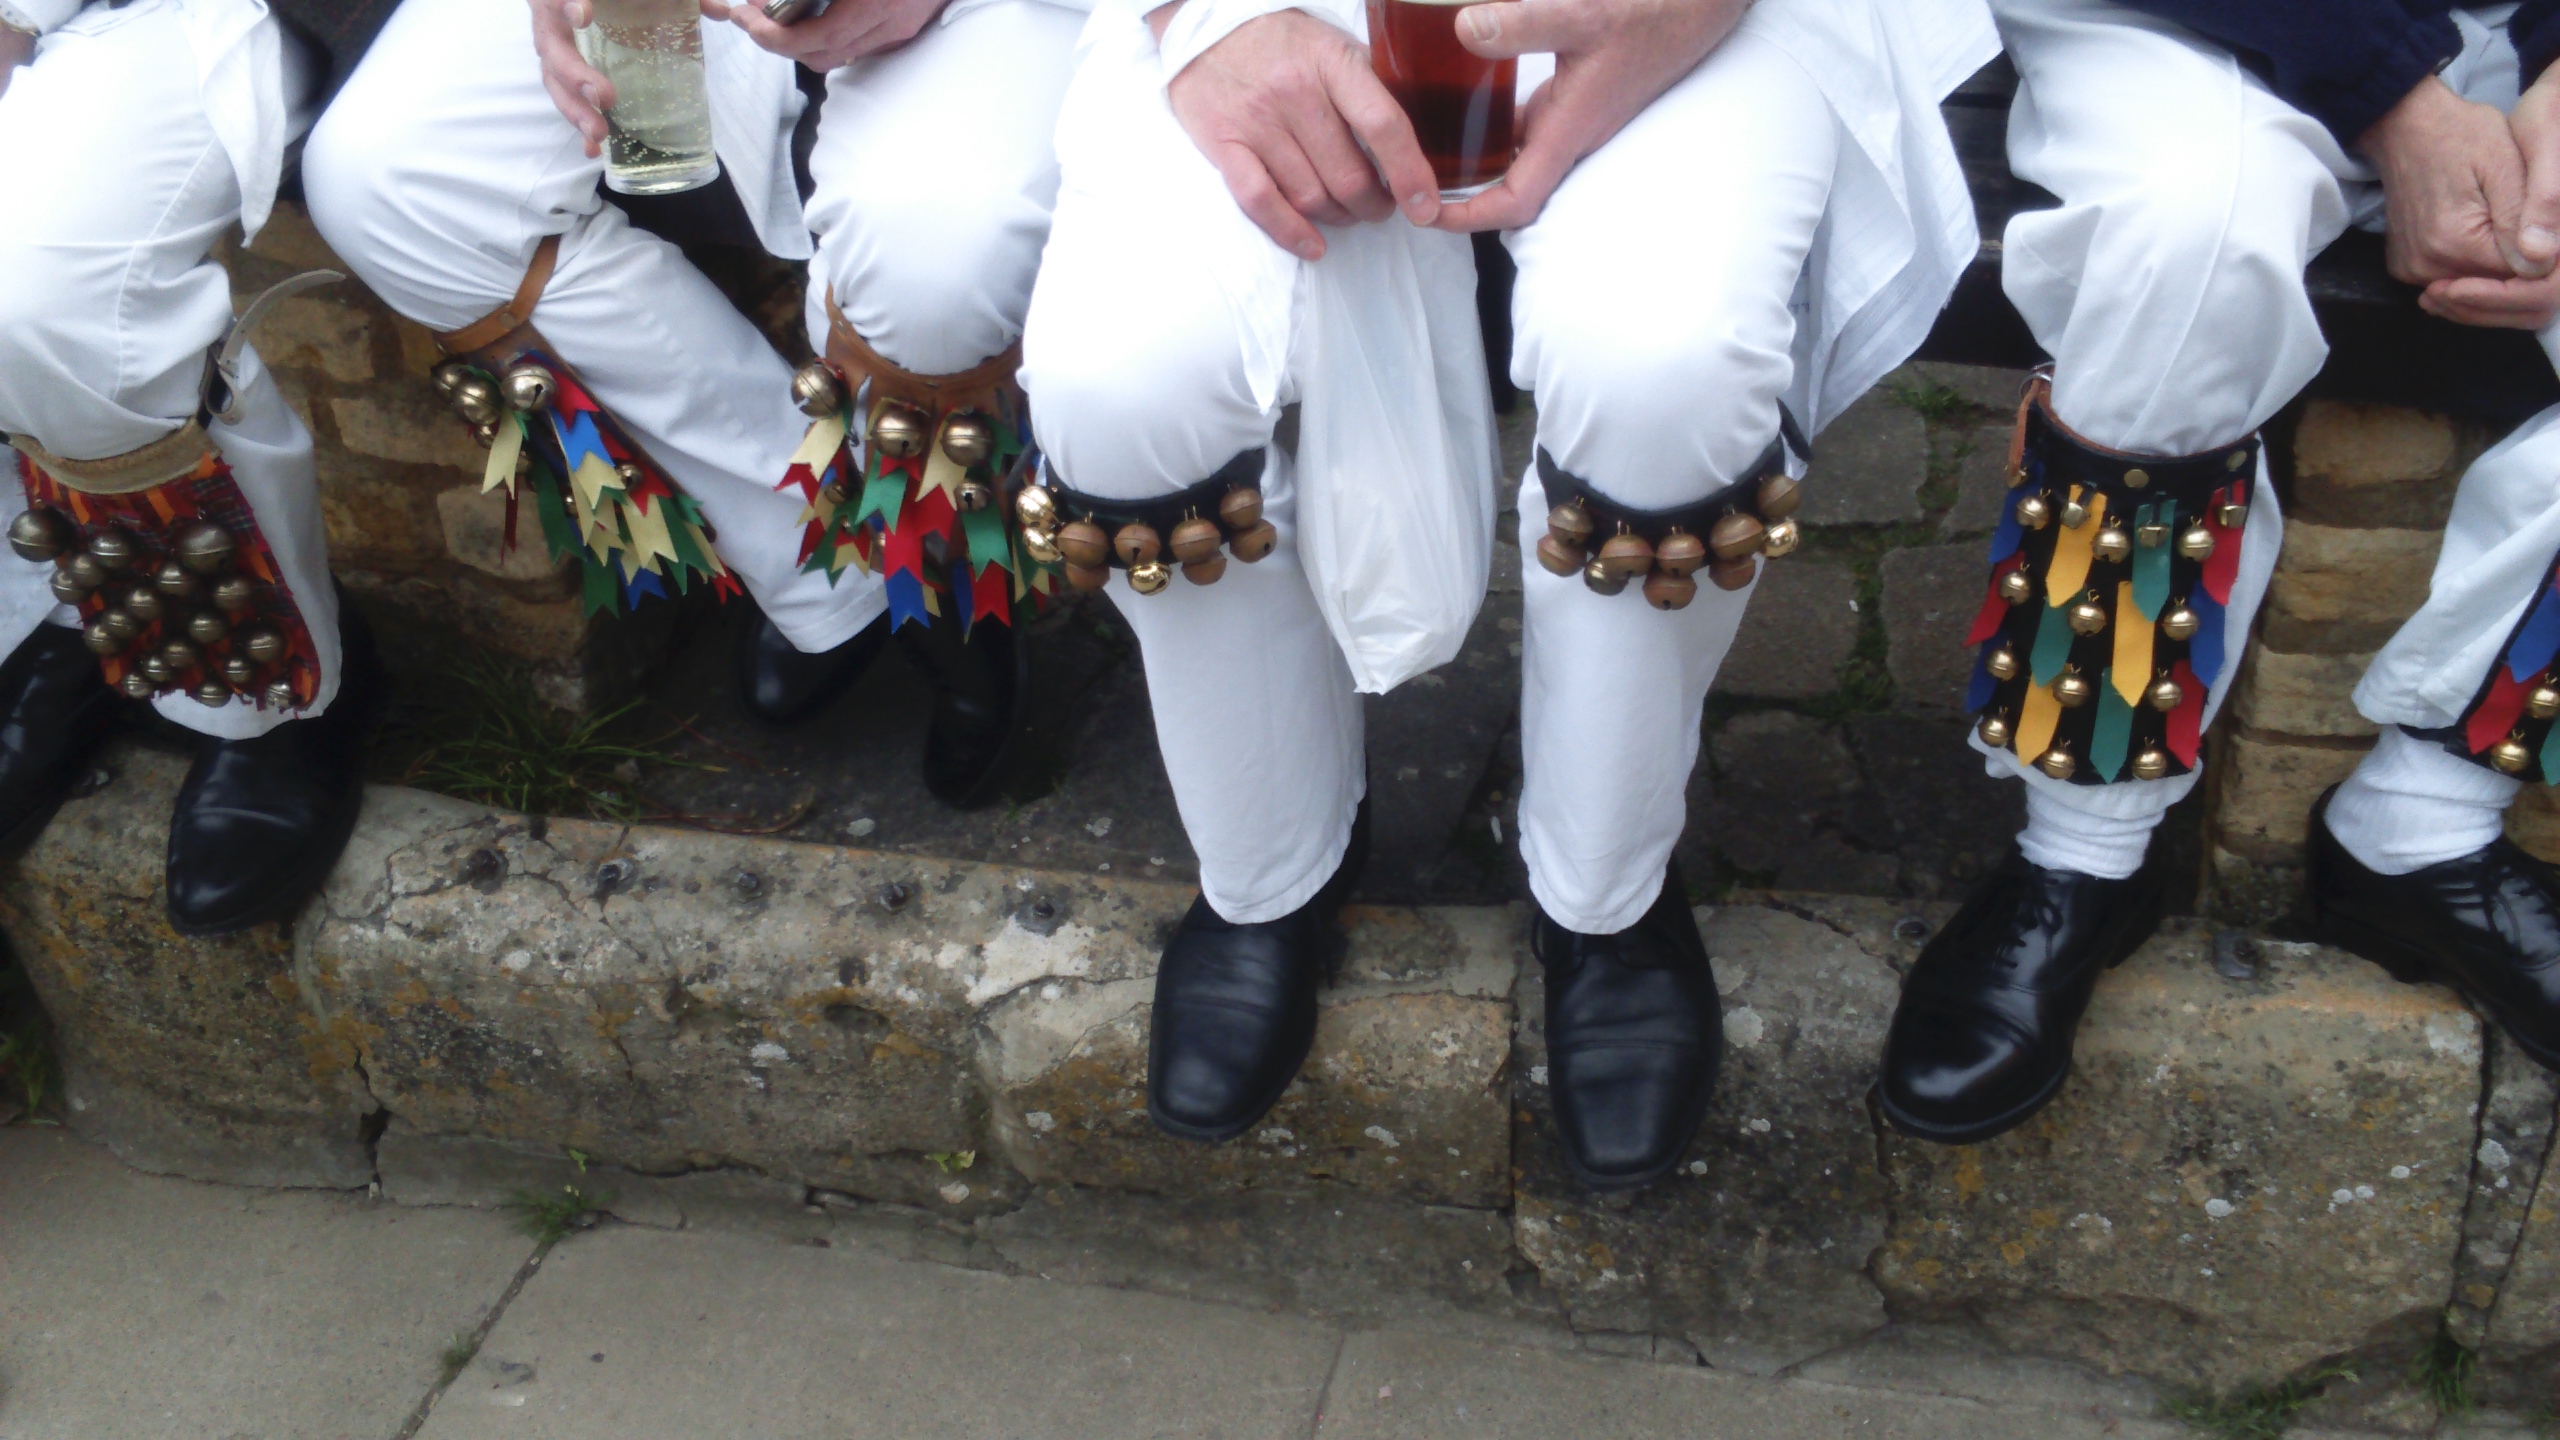 Legs with bells on at The Crown and Trumpet in Broadway